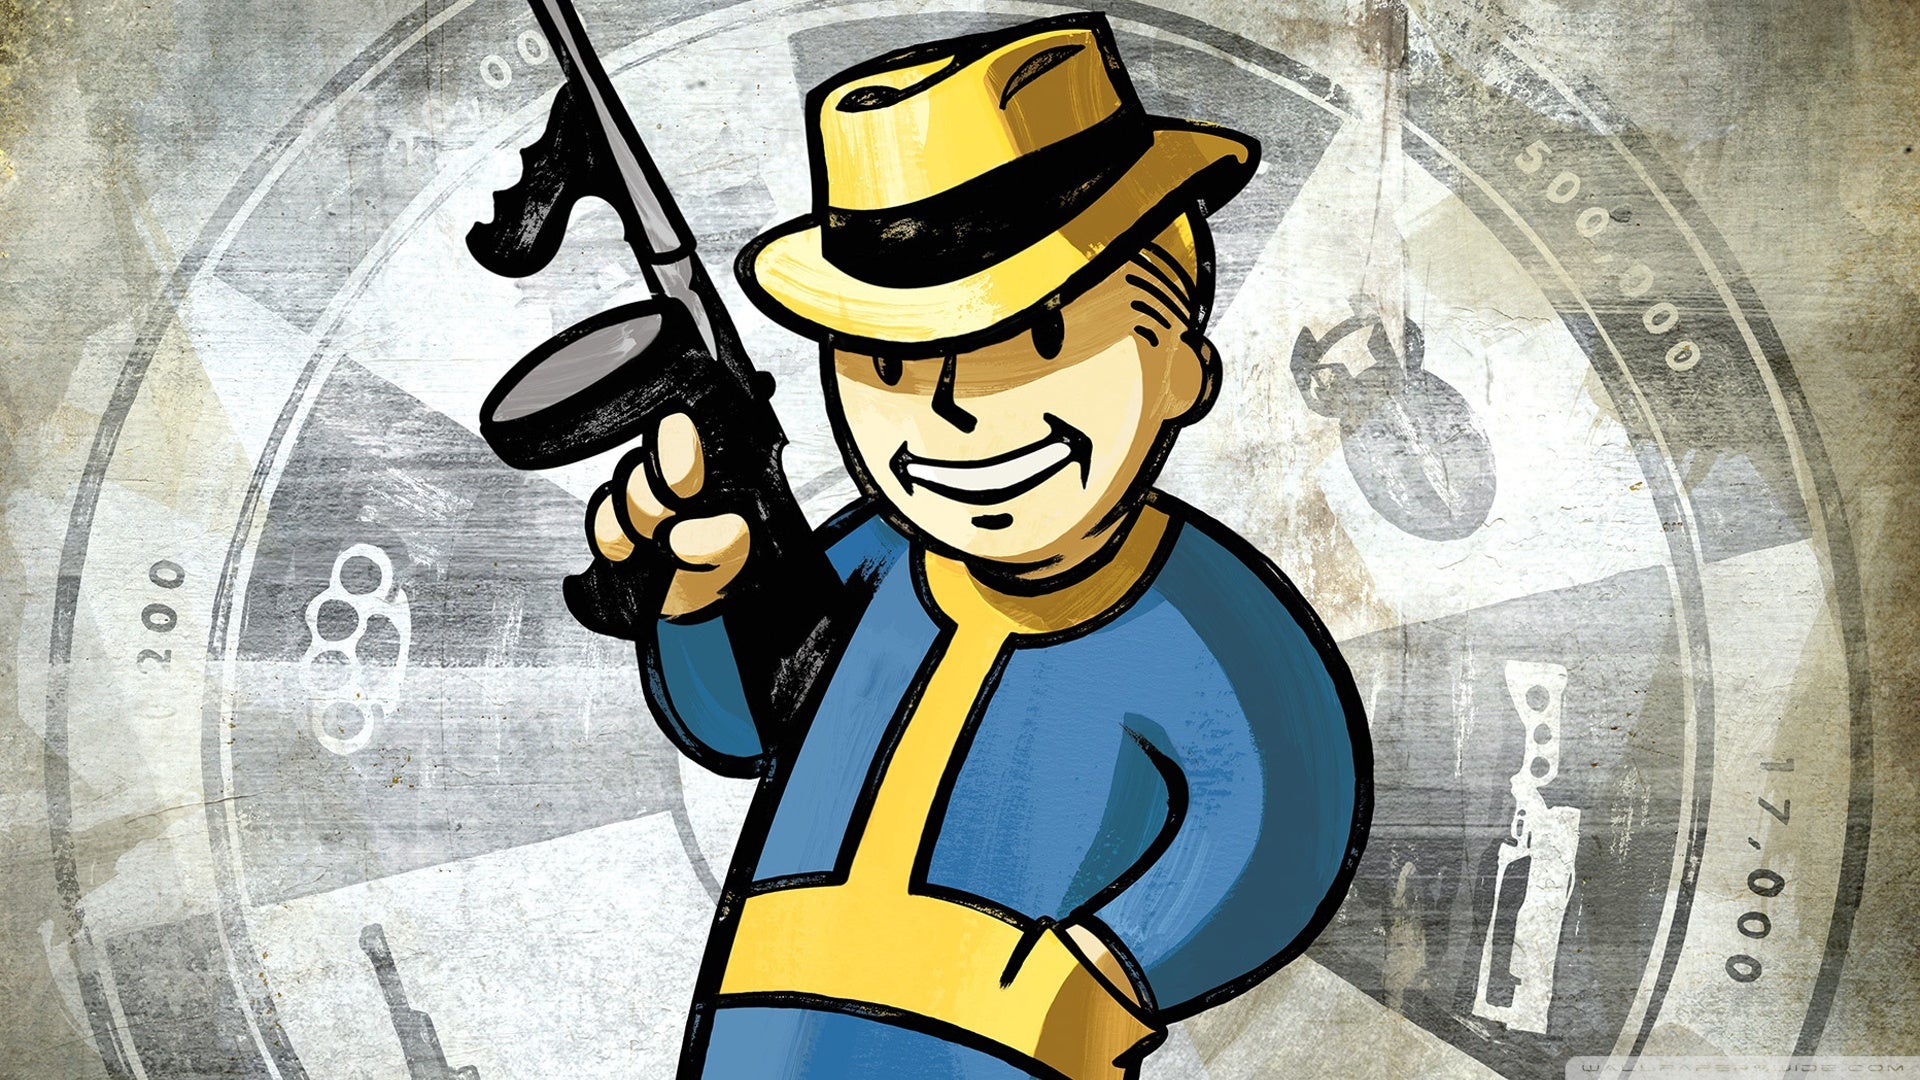 Image for Fallout: New Vegas was originally meant to be an expansion for Fallout 3